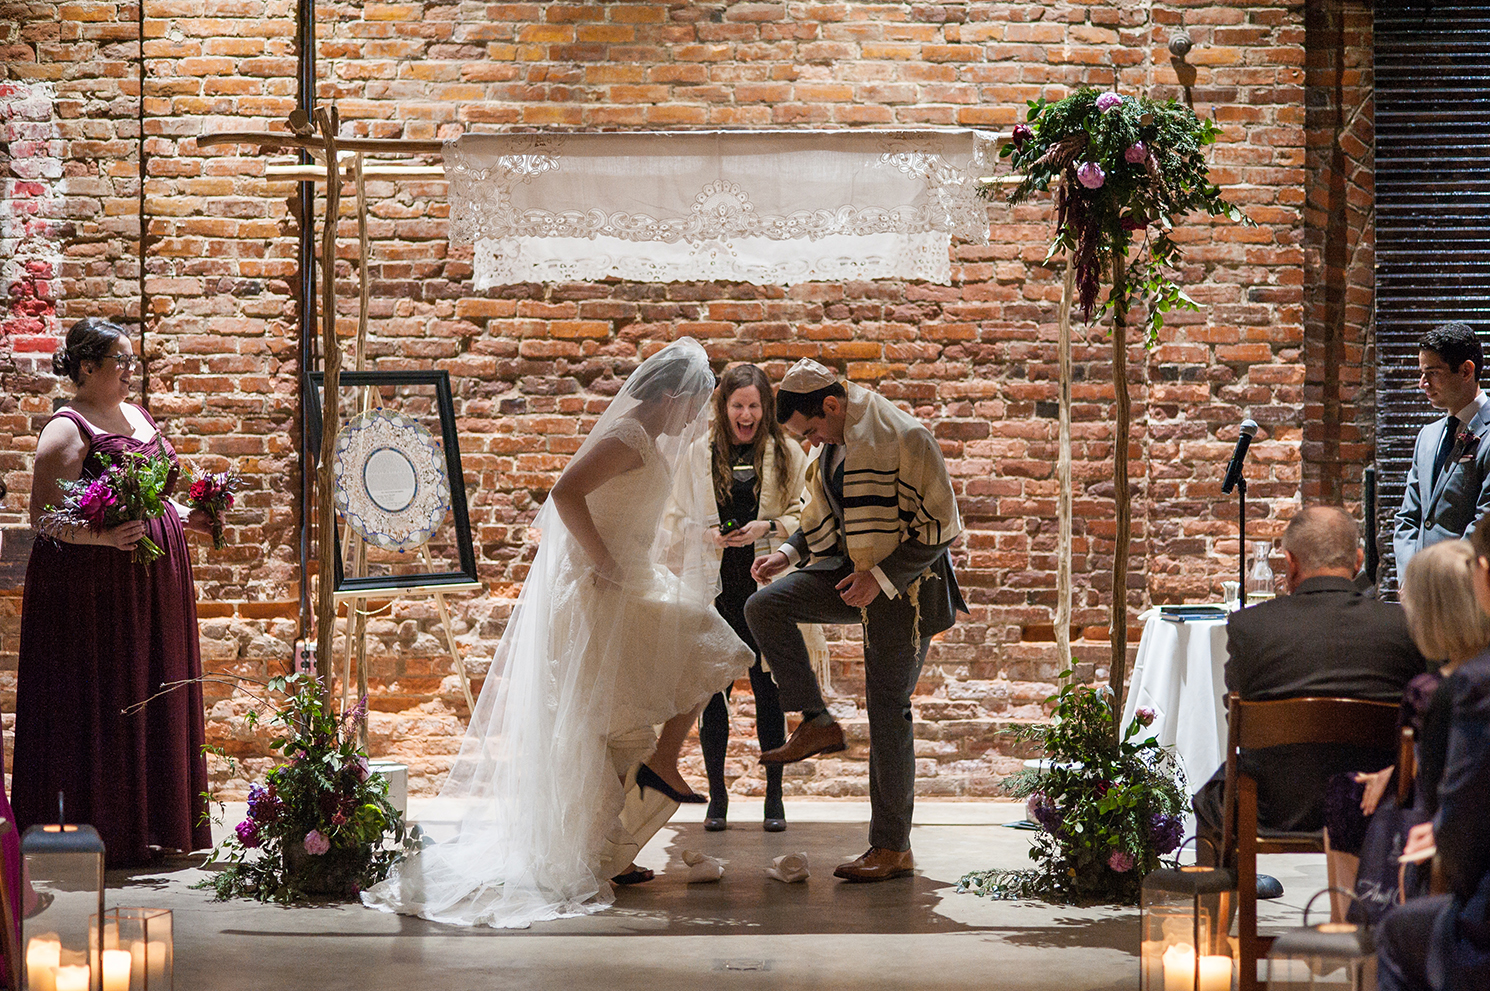 A couple steps on glass during their wedding ceremony.